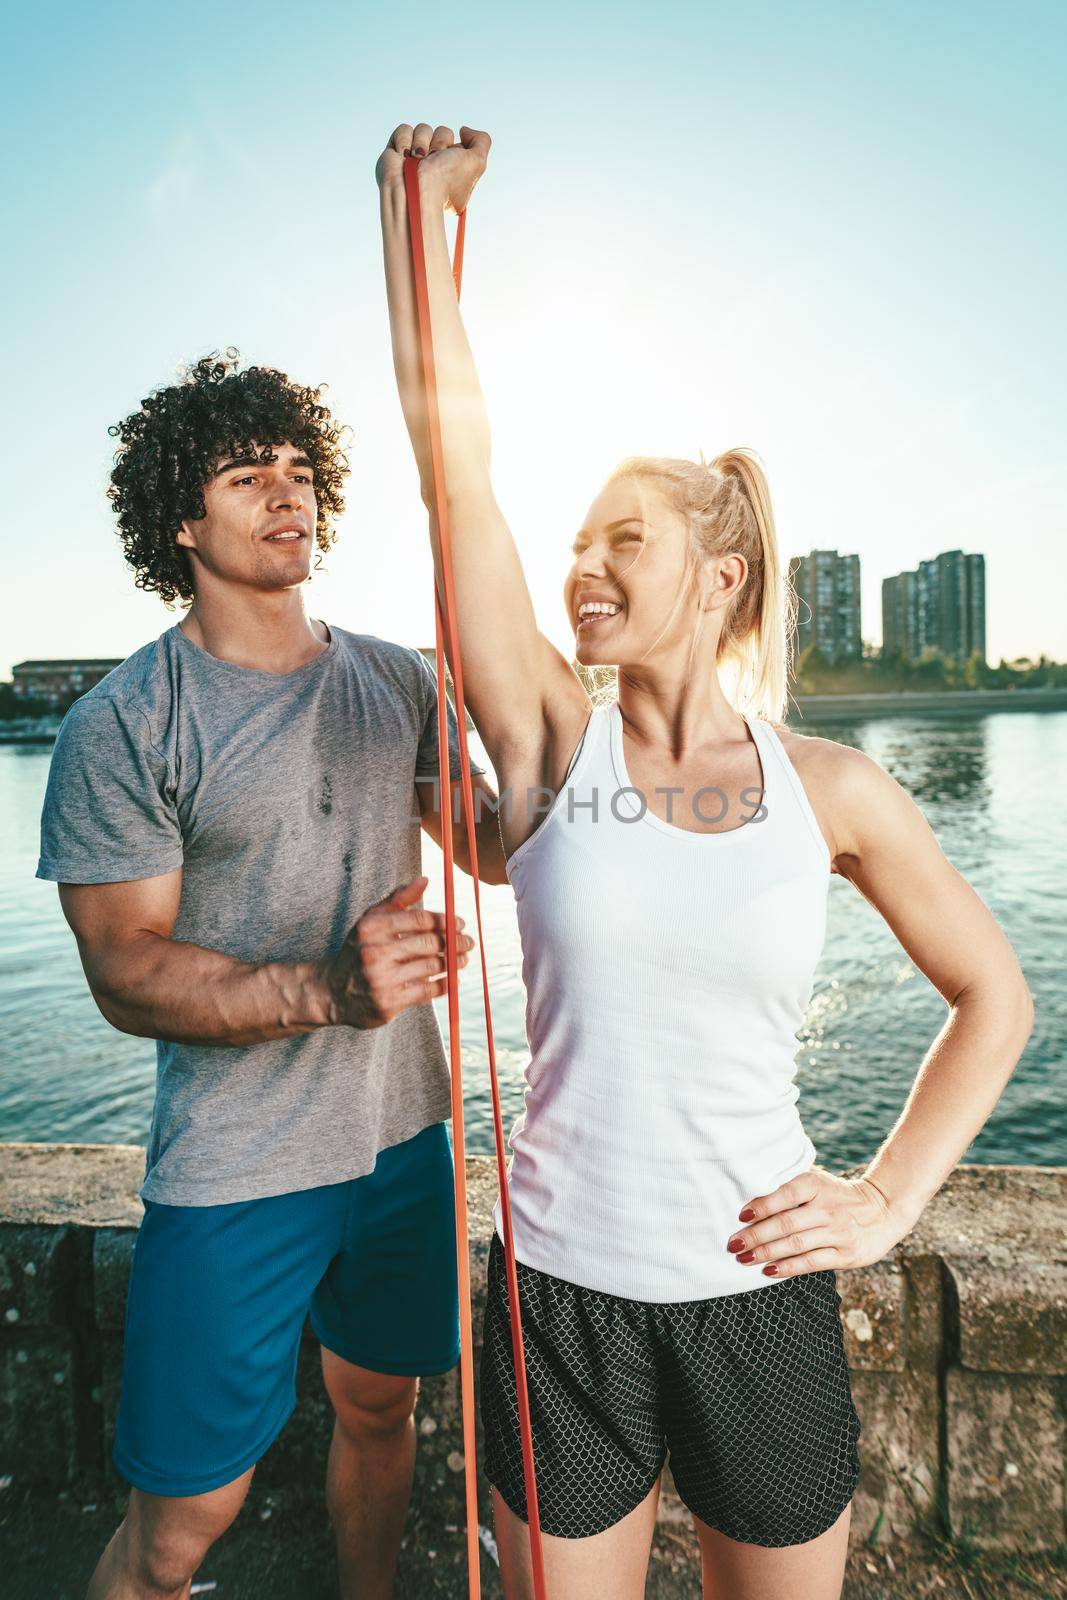 Young fitness couple is doing workout with rubber band by the river in a sunset. The woman is stretching arms and the man supports her.